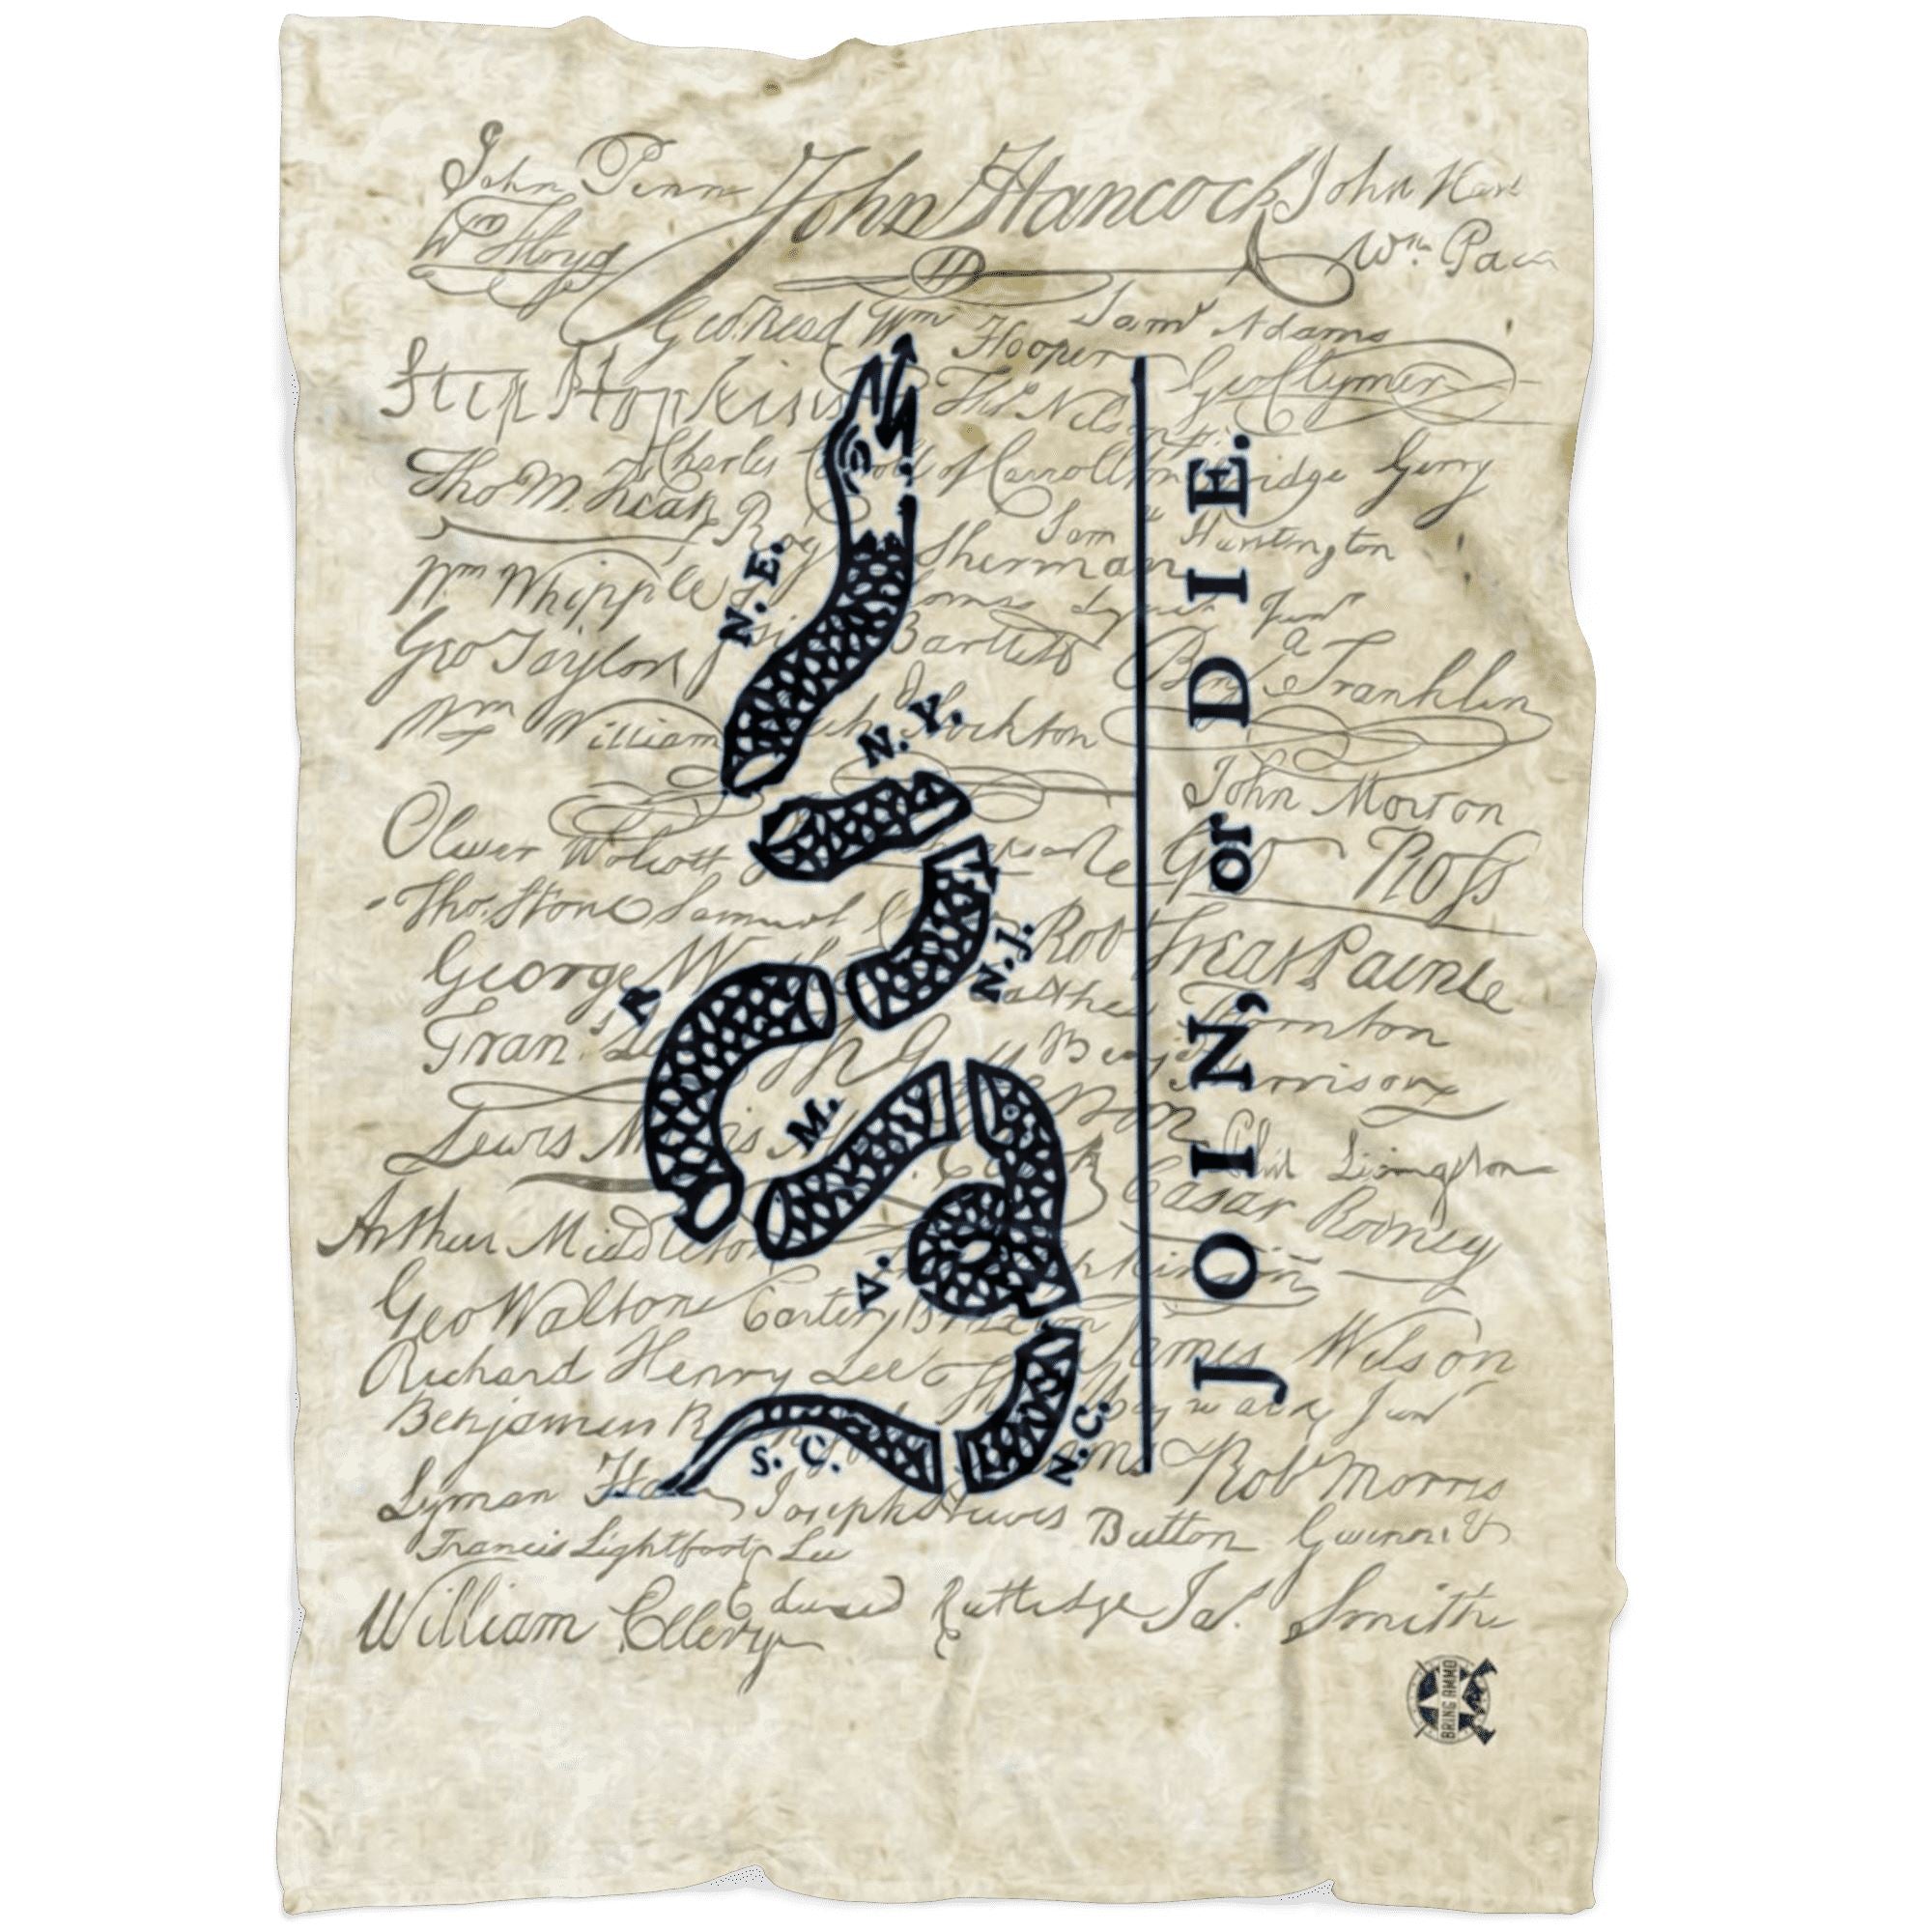 Join or Die with Declaration of Independence Signers Ultra Soft Micro Fleece Blanket Blankets LARGE (60"x50") 